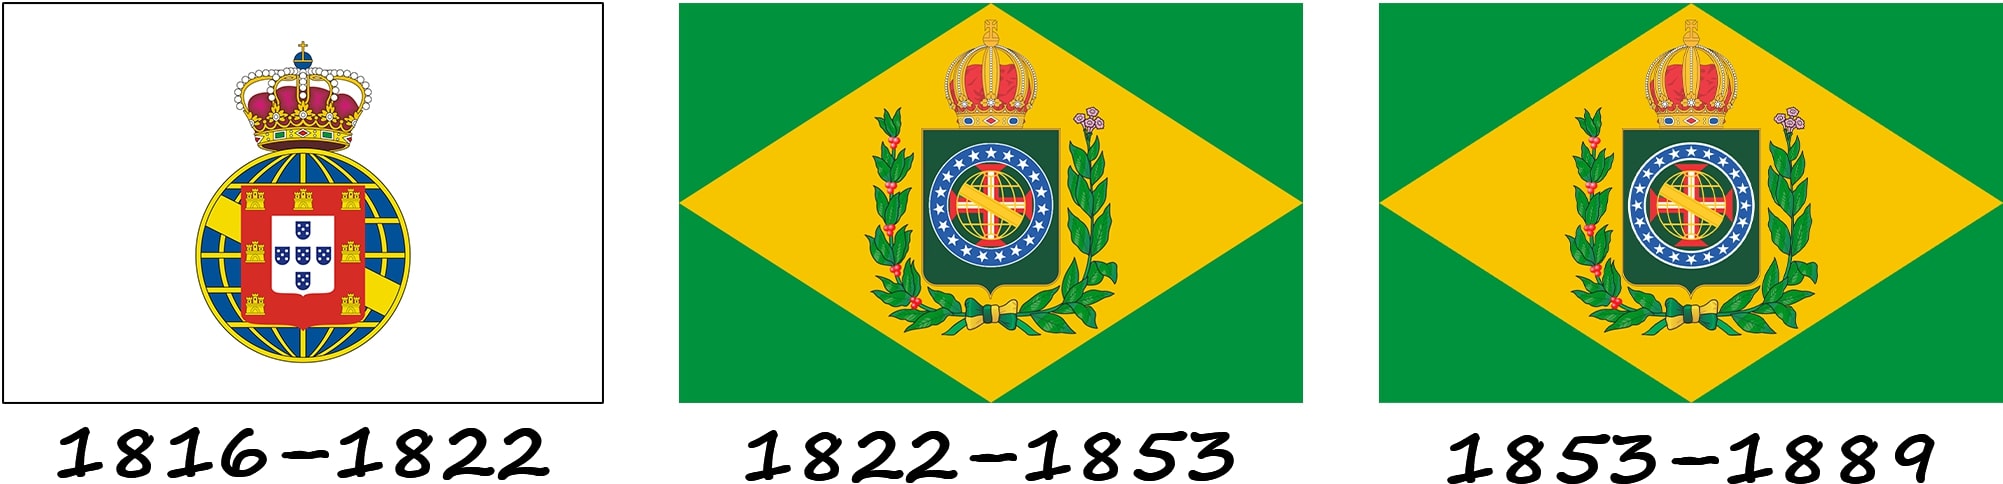 History of the flag before the establishment of the Republic of Brazil